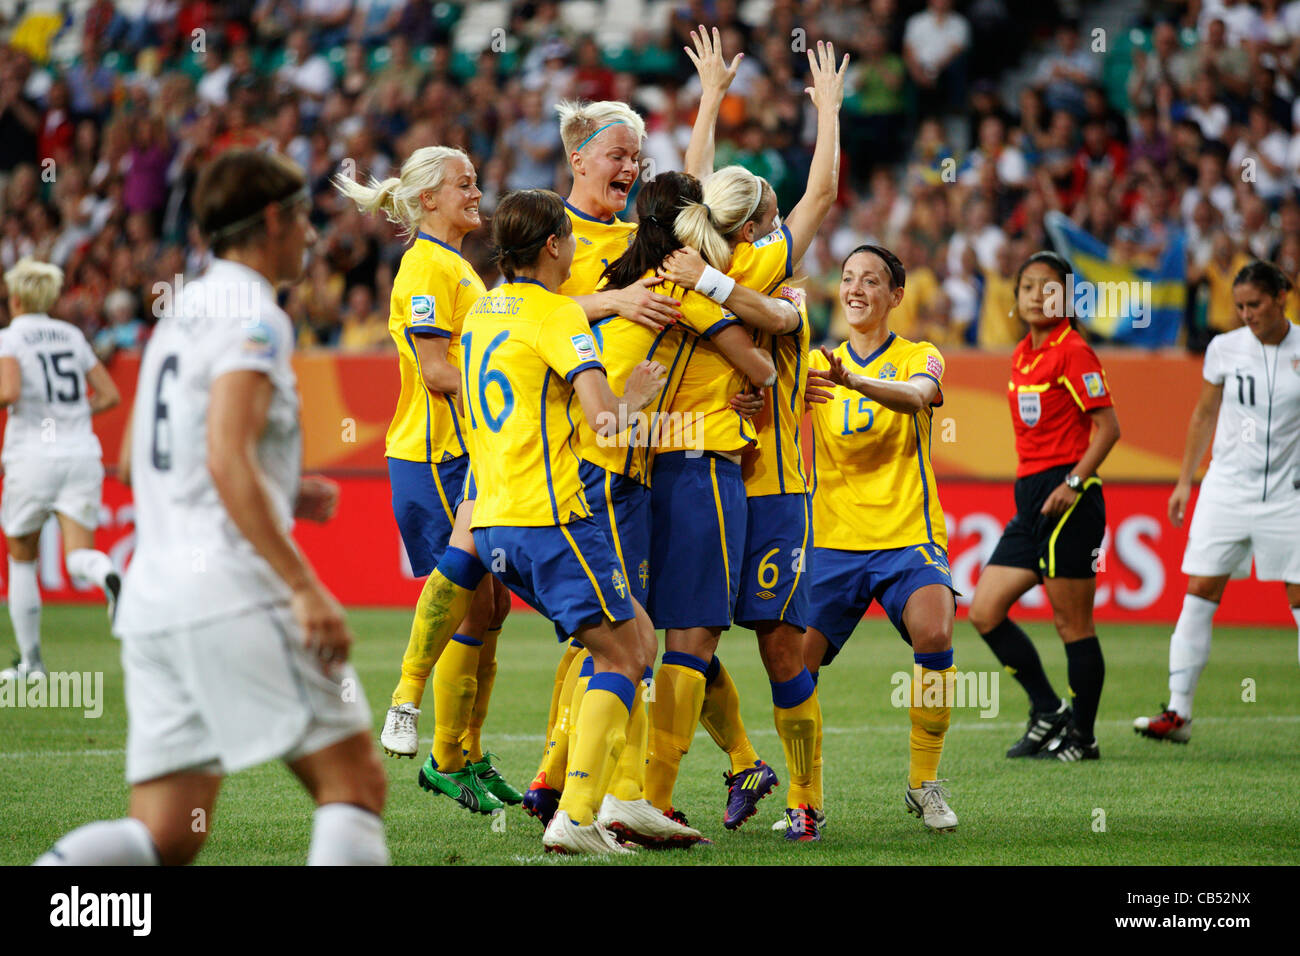 Sweden players celebrate after a goal against the United States during a 2011 Women's World Cup Group C match. Stock Photo